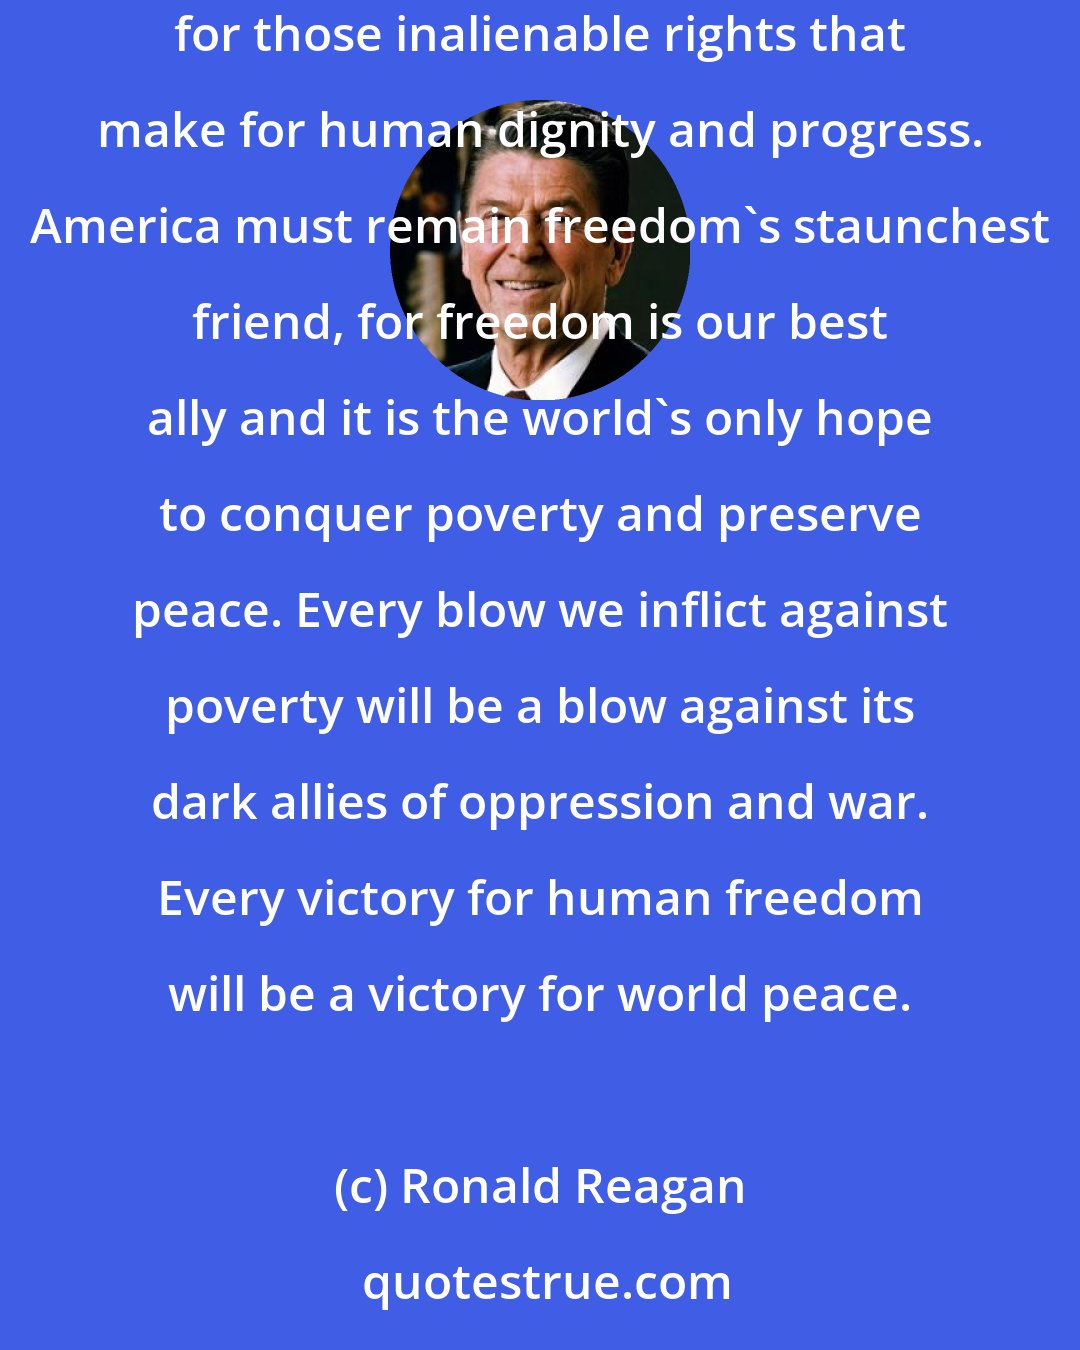 Ronald Reagan: Freedom is one of the deepest and noblest aspirations of the human spirit. People, worldwide, hunger for the right of self-determination, for those inalienable rights that make for human dignity and progress. America must remain freedom's staunchest friend, for freedom is our best ally and it is the world's only hope to conquer poverty and preserve peace. Every blow we inflict against poverty will be a blow against its dark allies of oppression and war. Every victory for human freedom will be a victory for world peace.